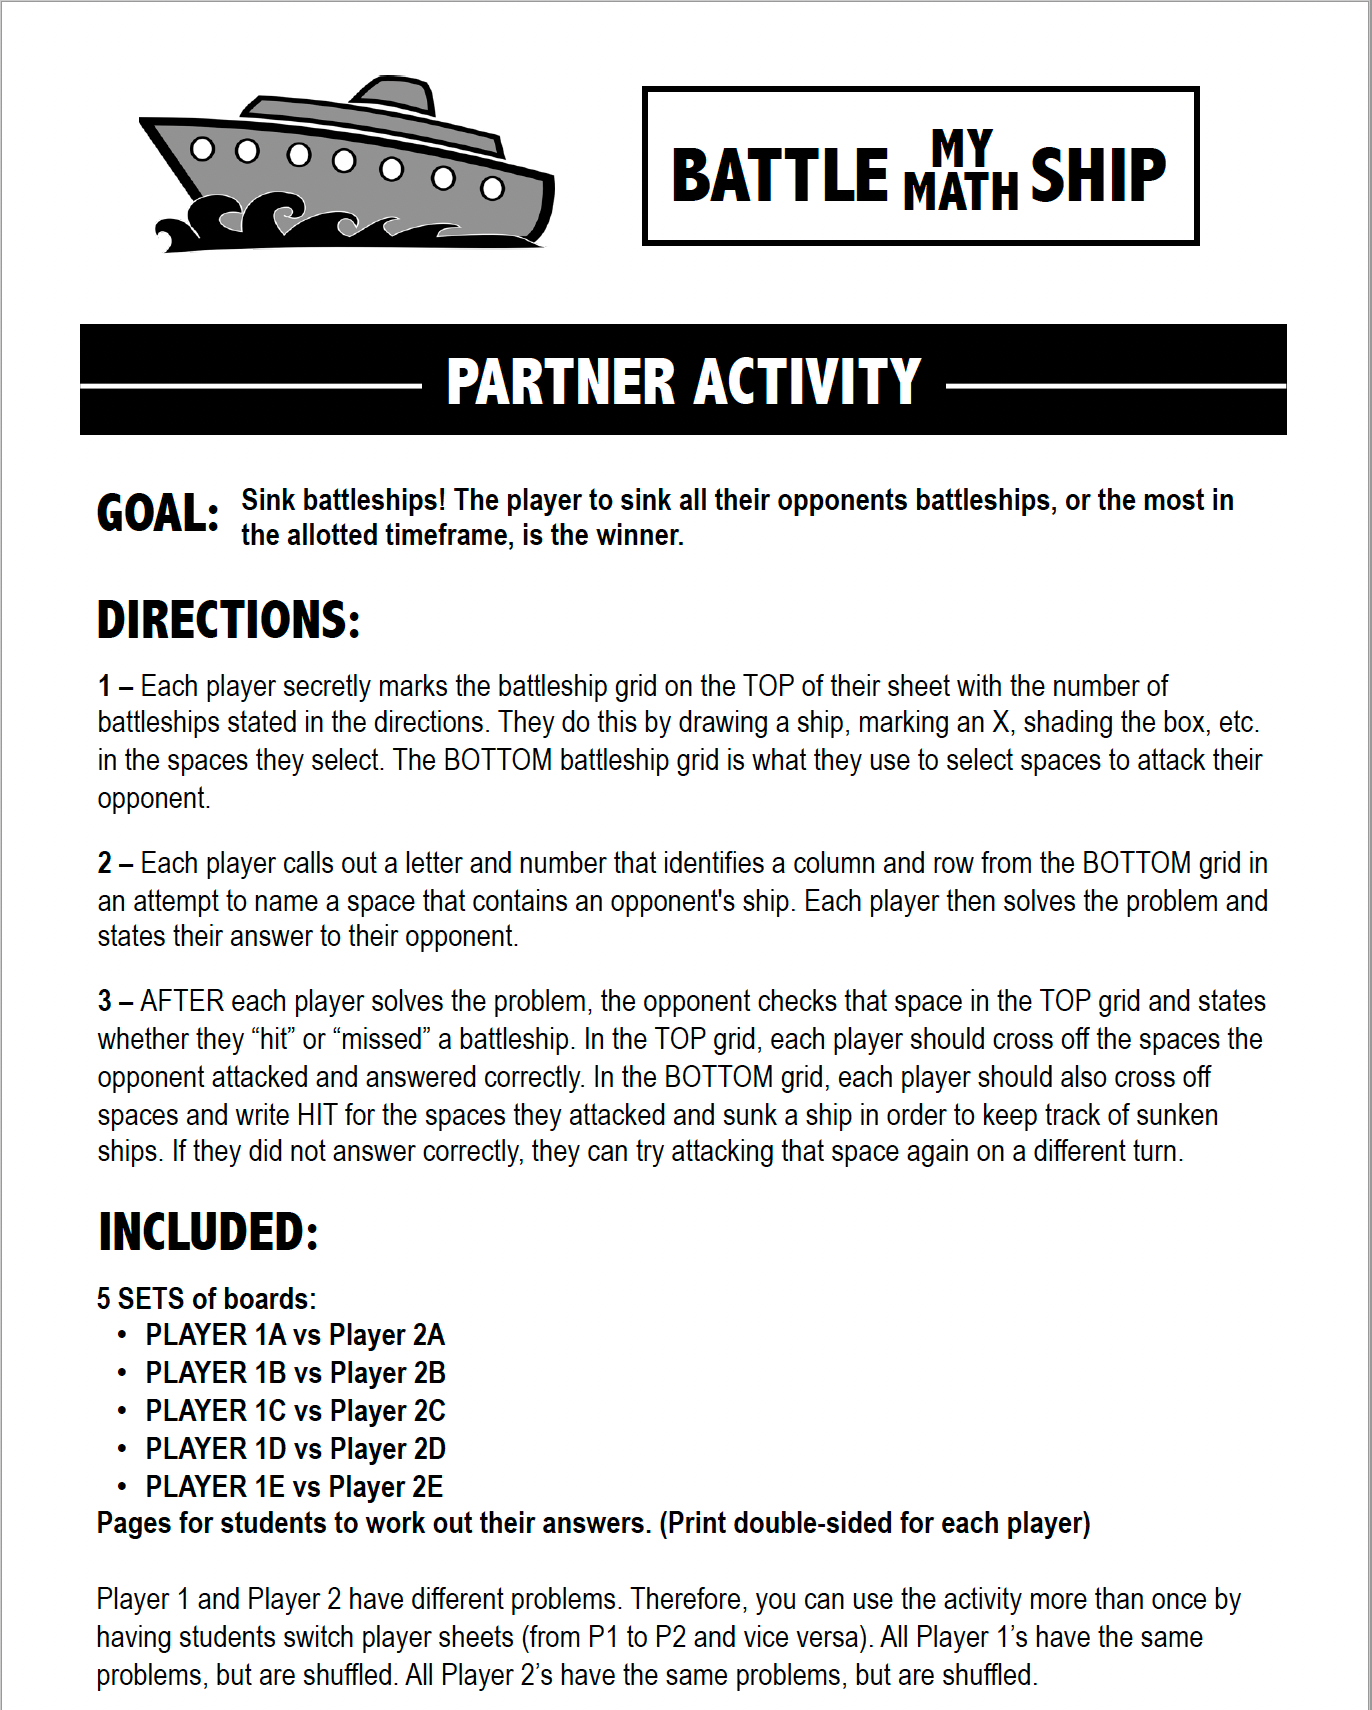 Simplify Rational Expressions | Battle My Math Ship Game | Print and Digital